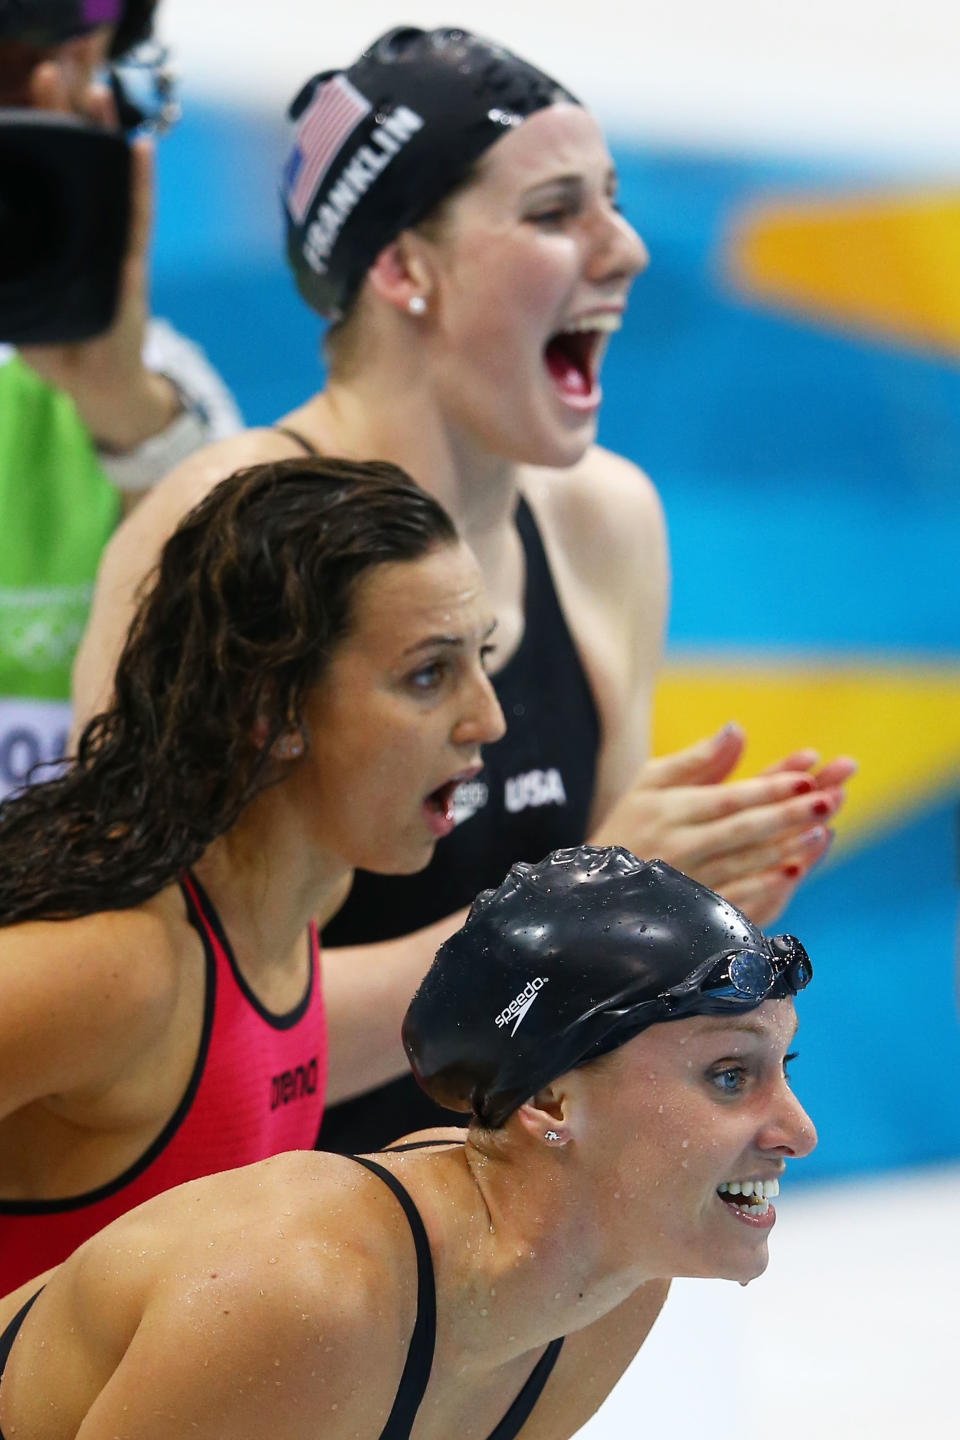 Dana Vollmer, Missy Franklin, and Rebecca Soni of the United States cheer on team mate Allison Schmitt in the Women's 4x100m Medley Relay on Day 8 of the London 2012 Olympic Games at the Aquatics Centre on August 4, 2012 in London, England. (Photo by Al Bello/Getty Images)